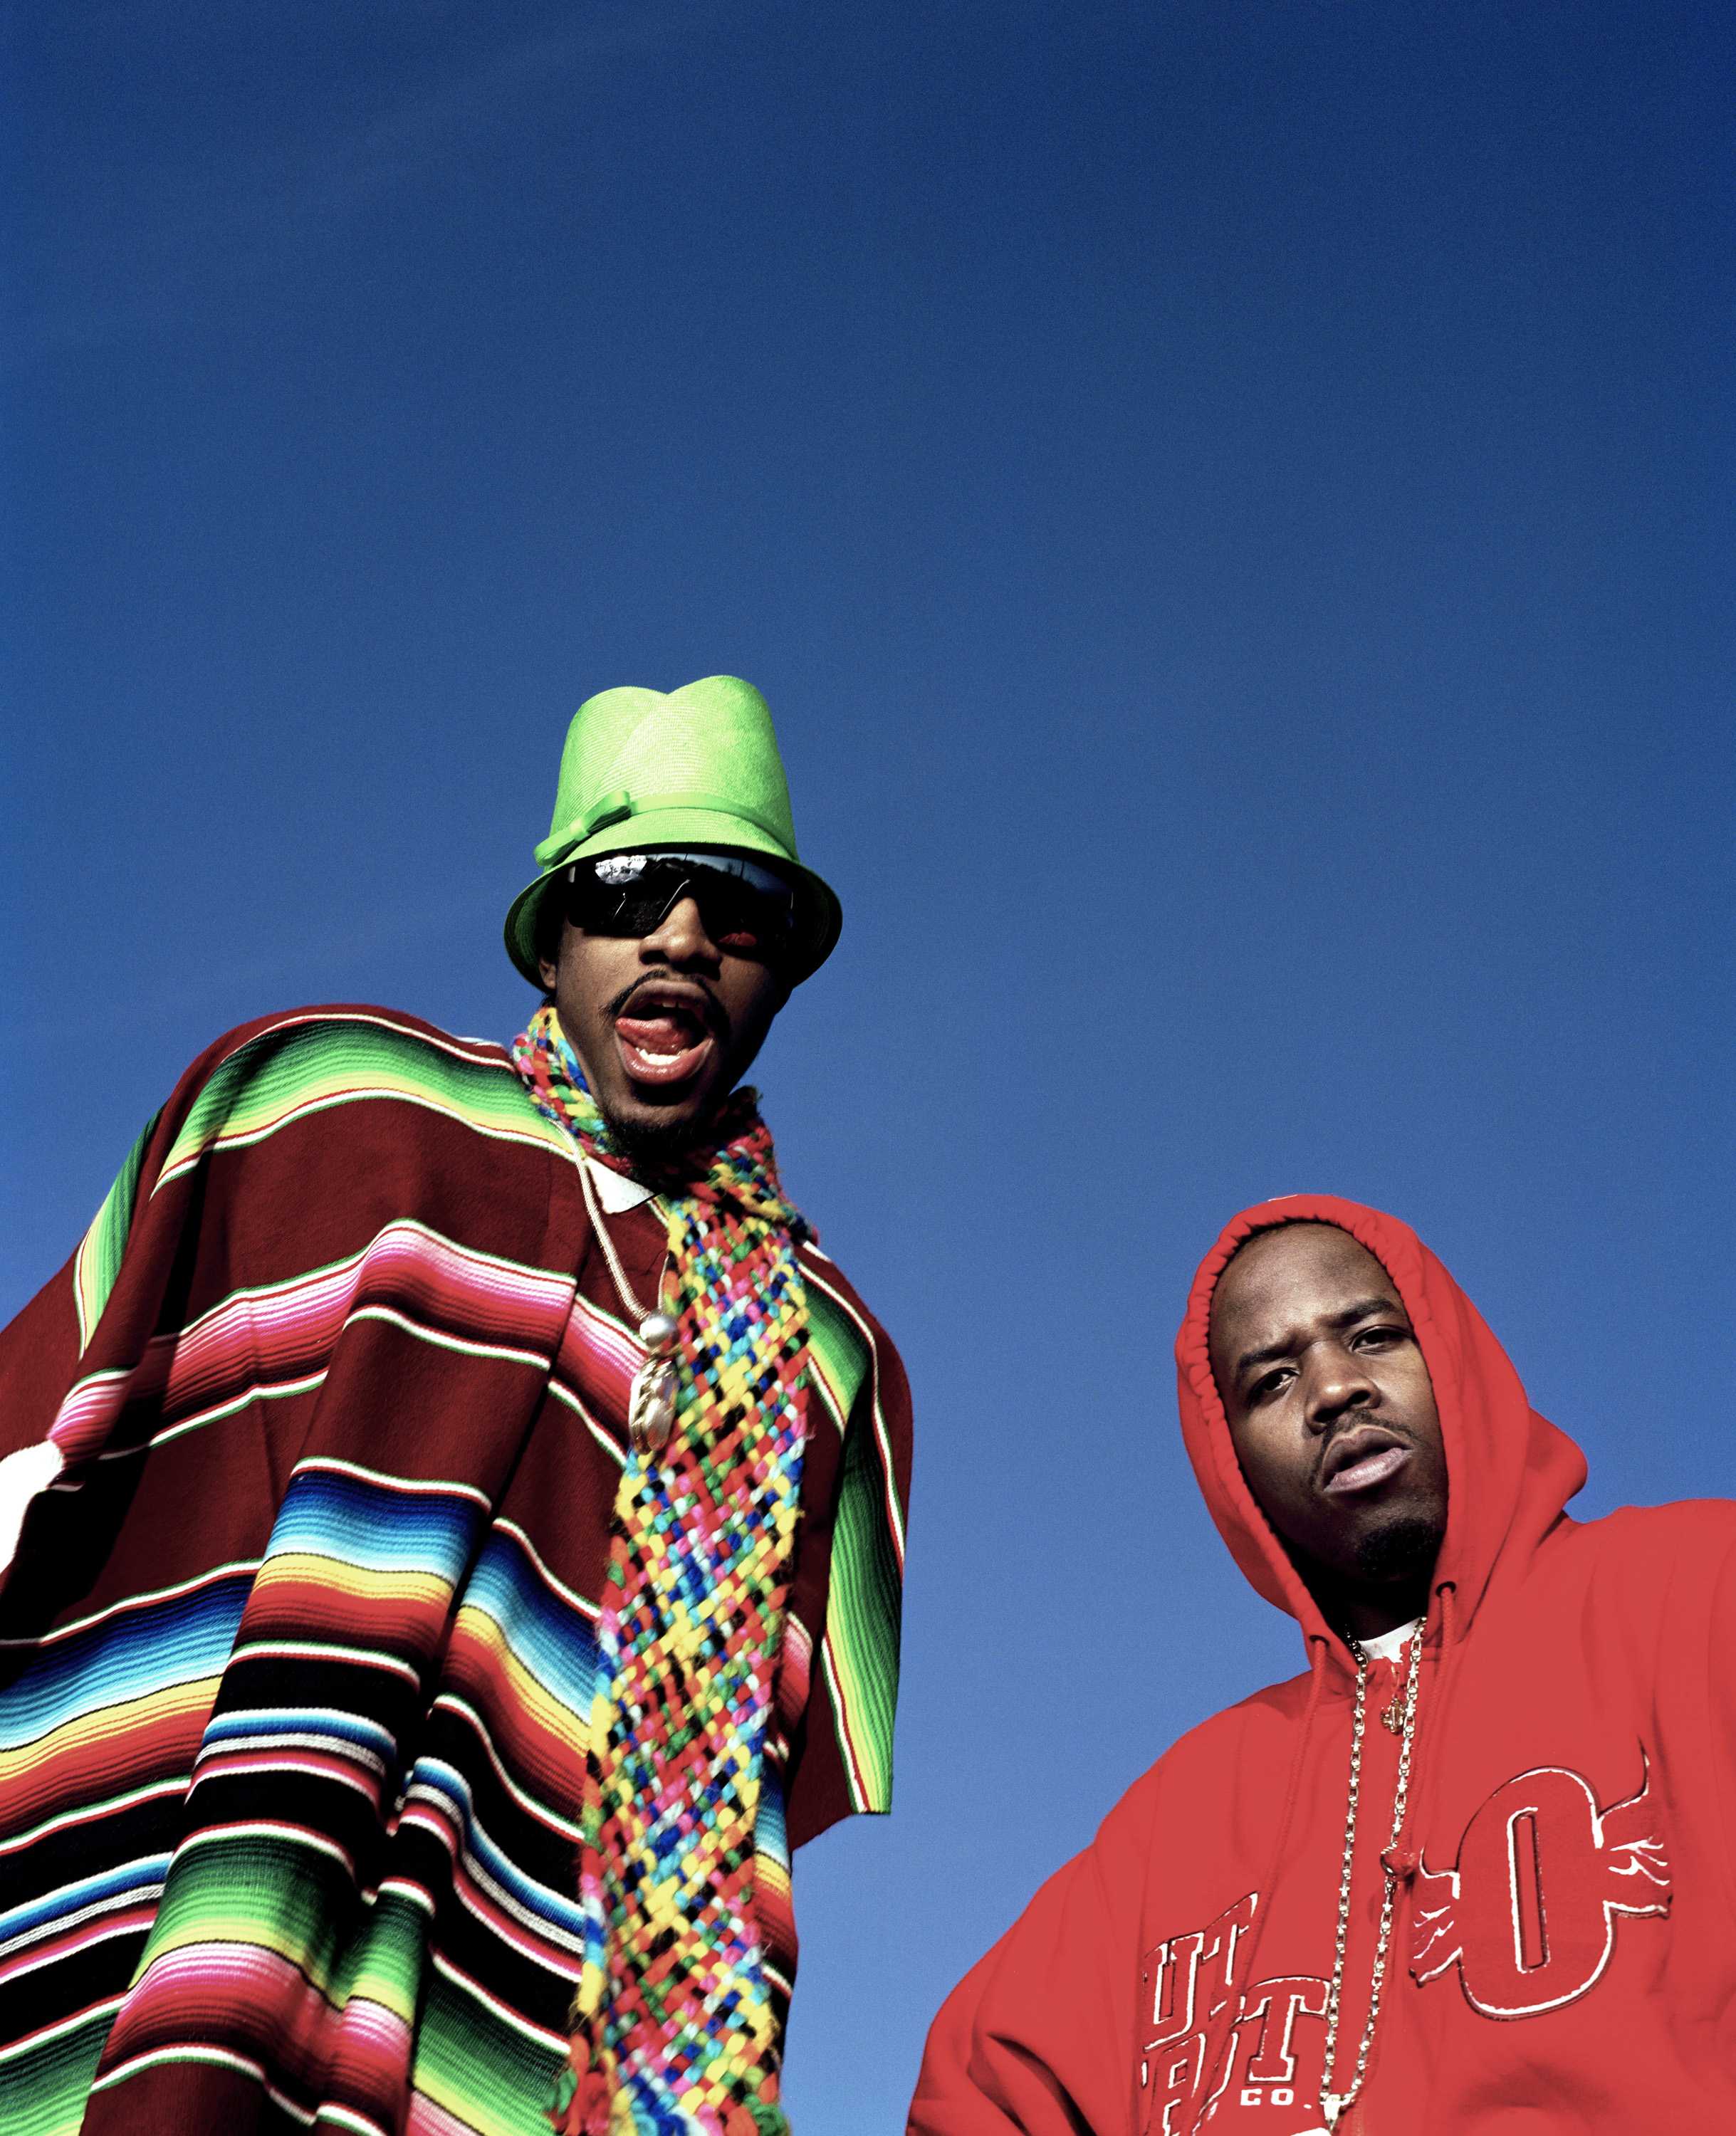 Against a blue sky, André 3000 and Big Boi stand above the camera. Big Boi is dressed in a red hoodie.